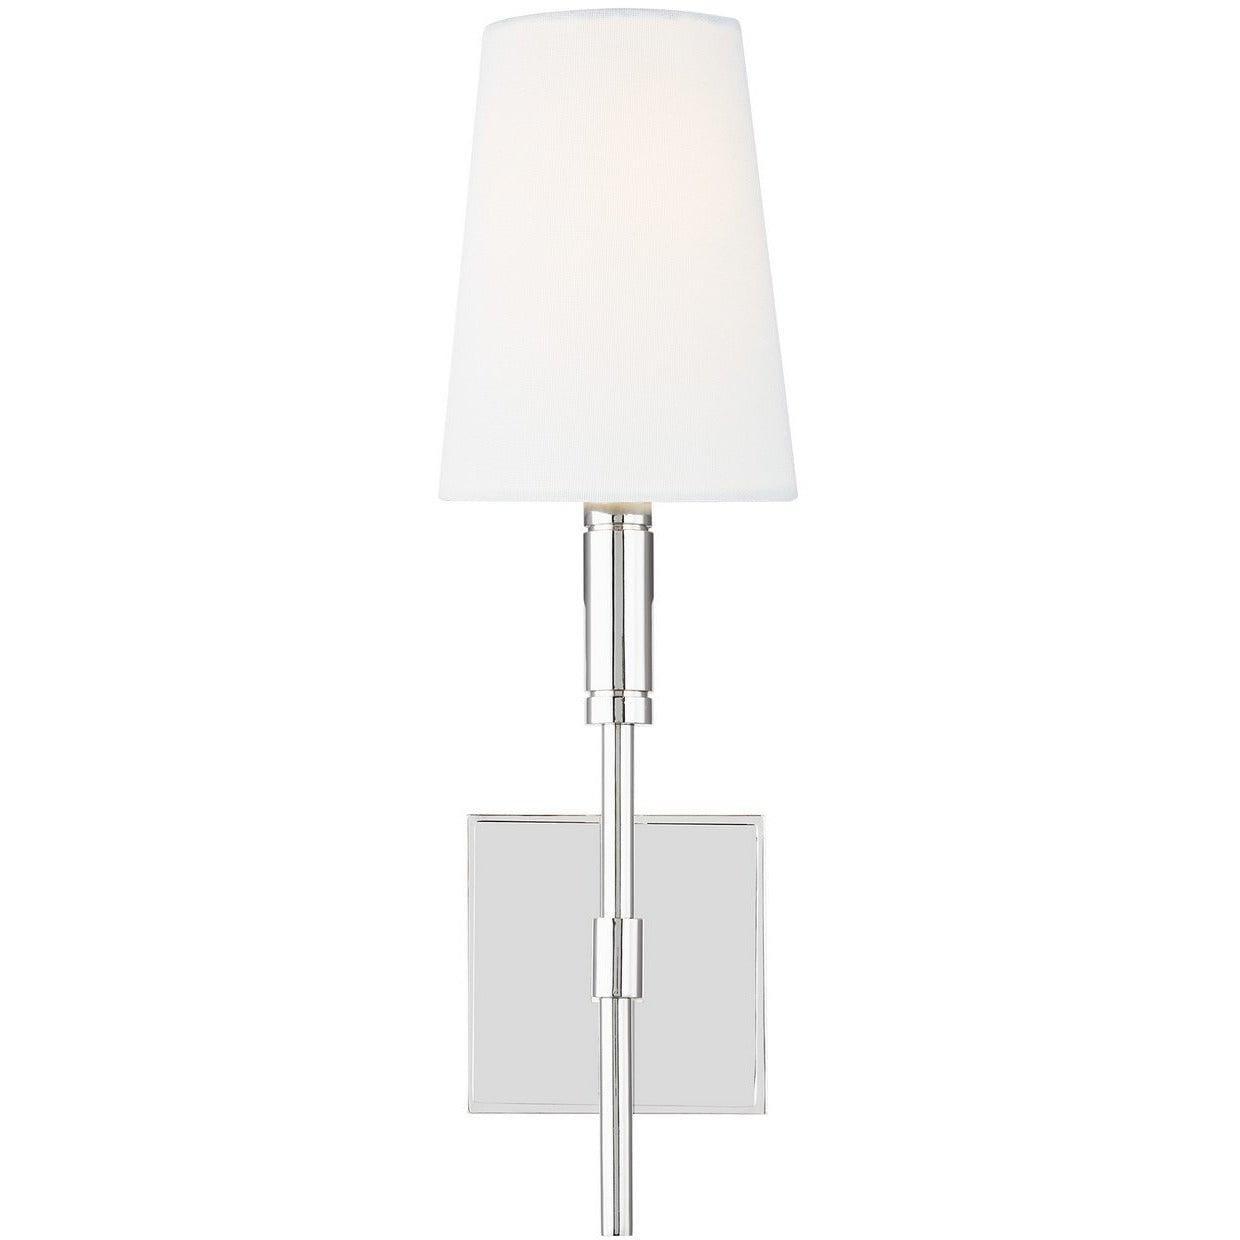 Visual Comfort Studio Collection - Beckham Classic Wall Sconce - TW1031PN | Montreal Lighting & Hardware